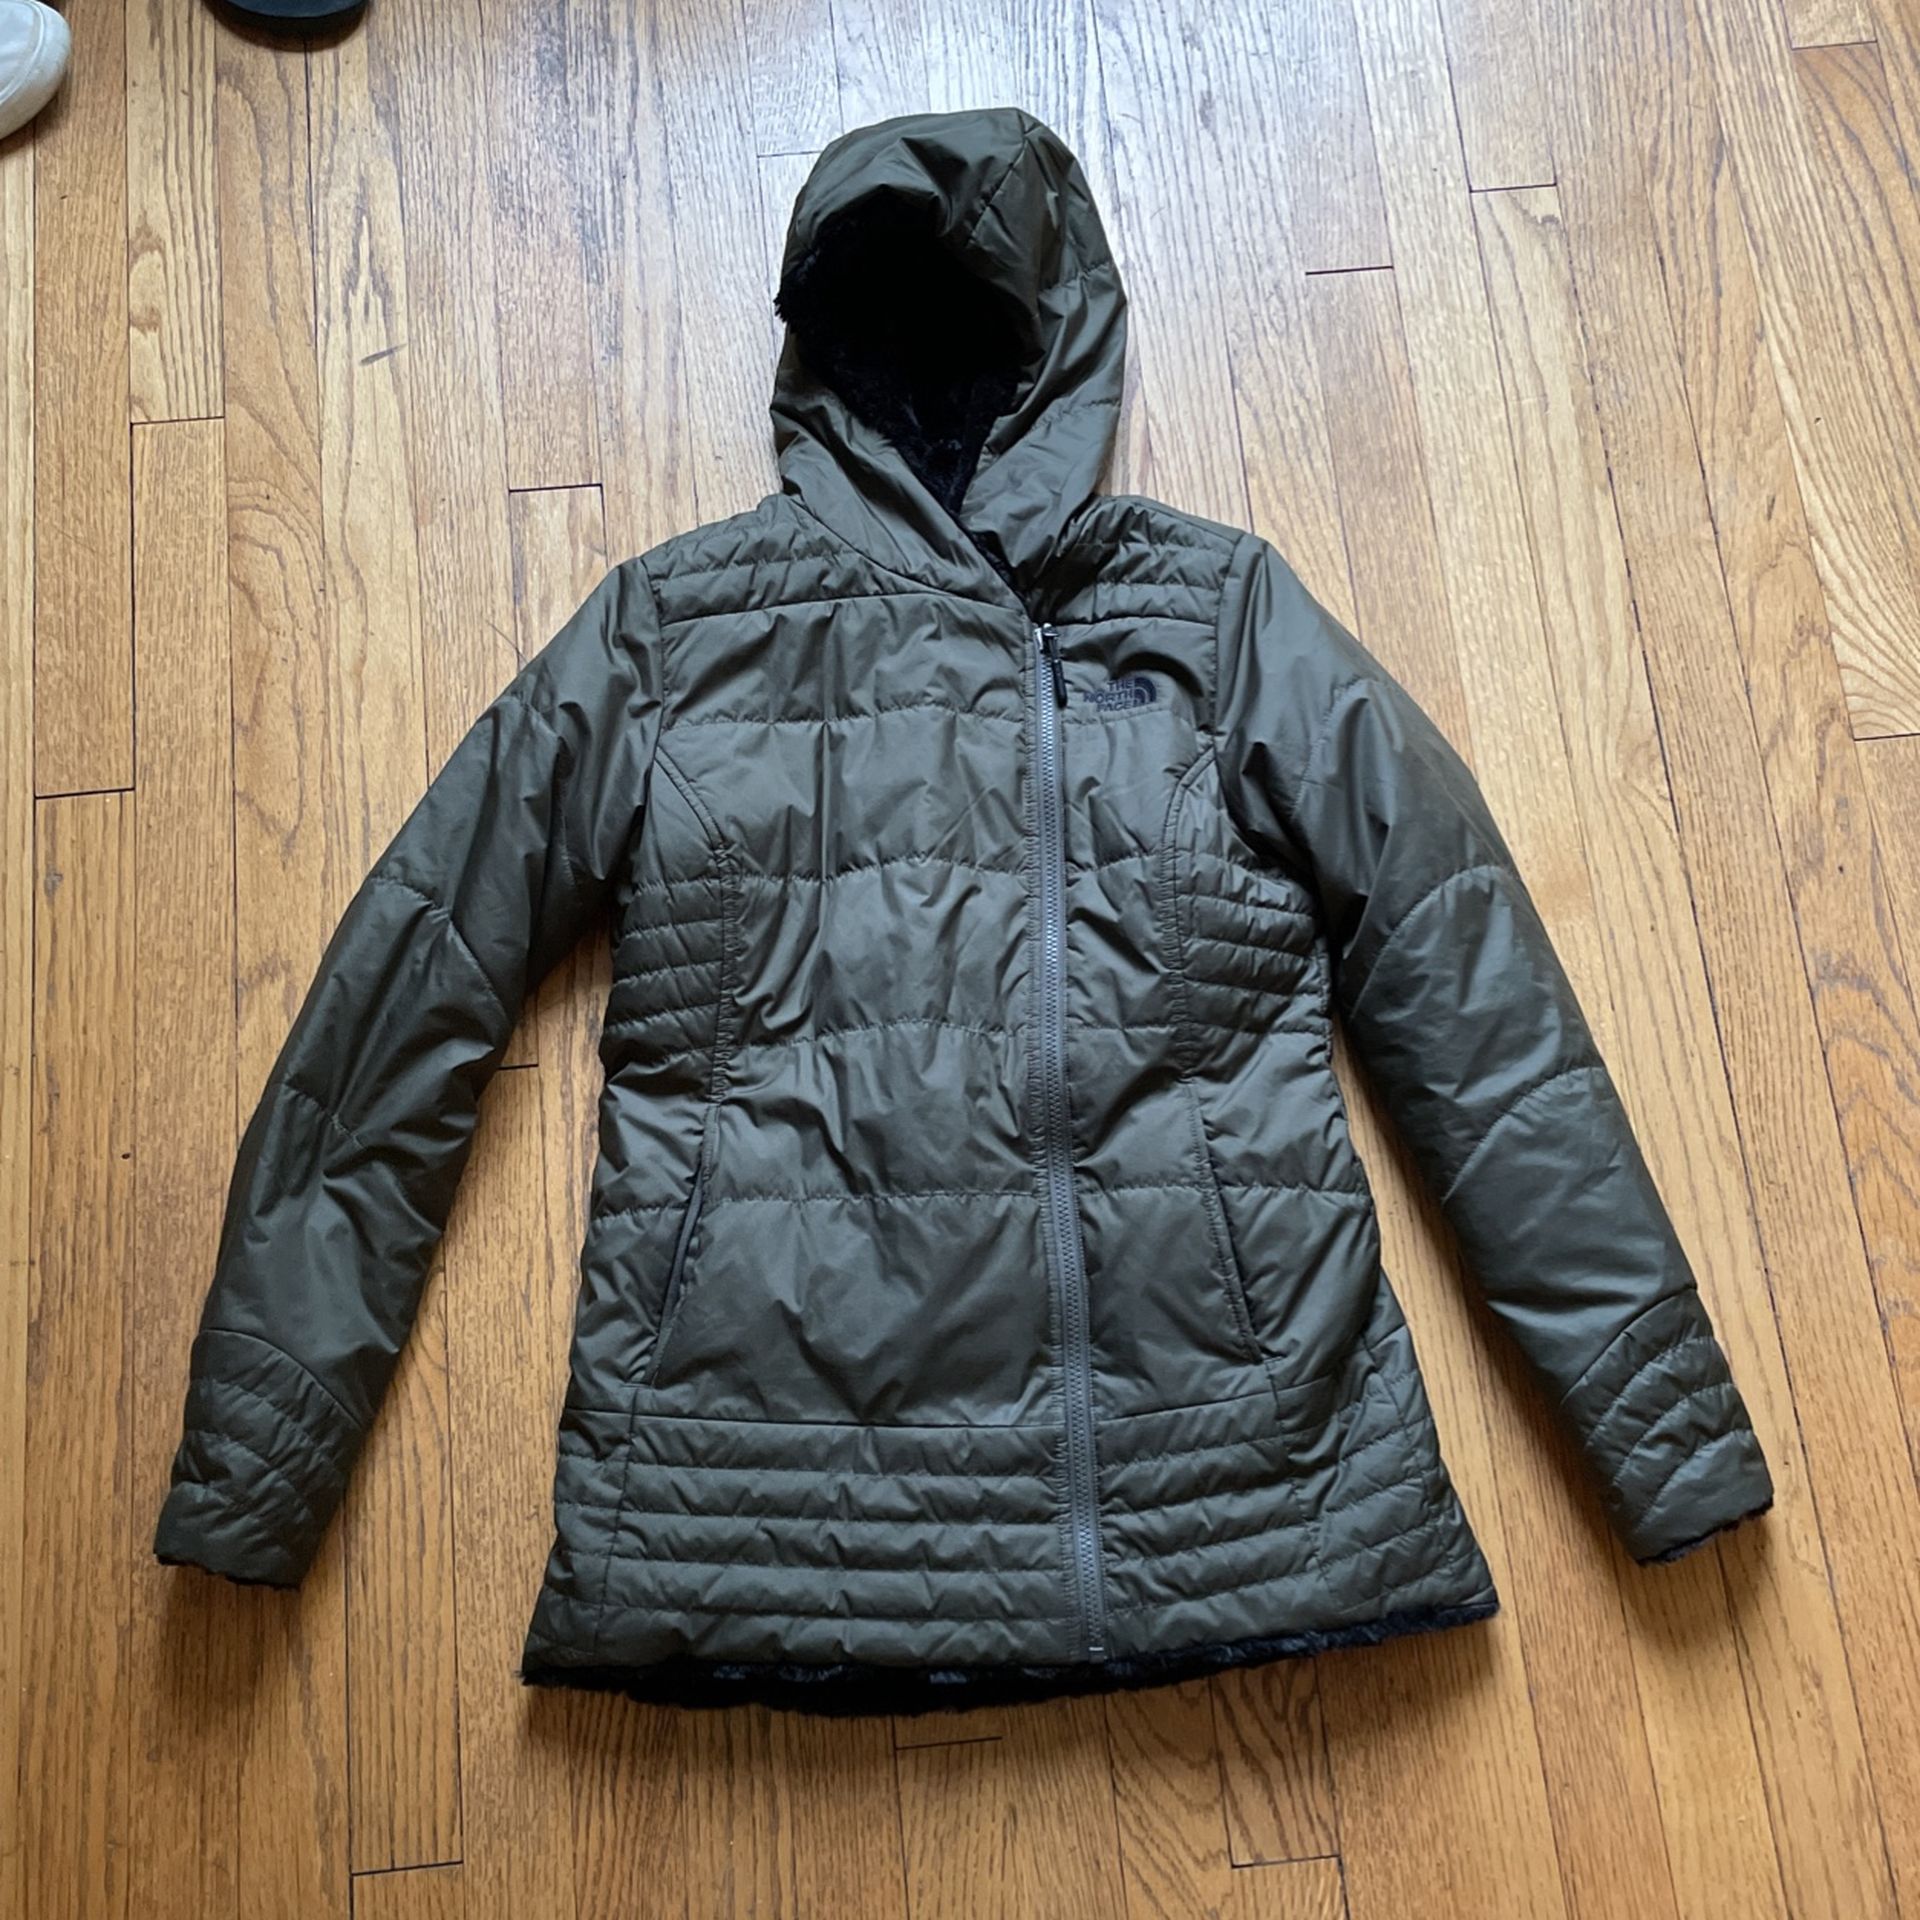 North face Reversible Jacket